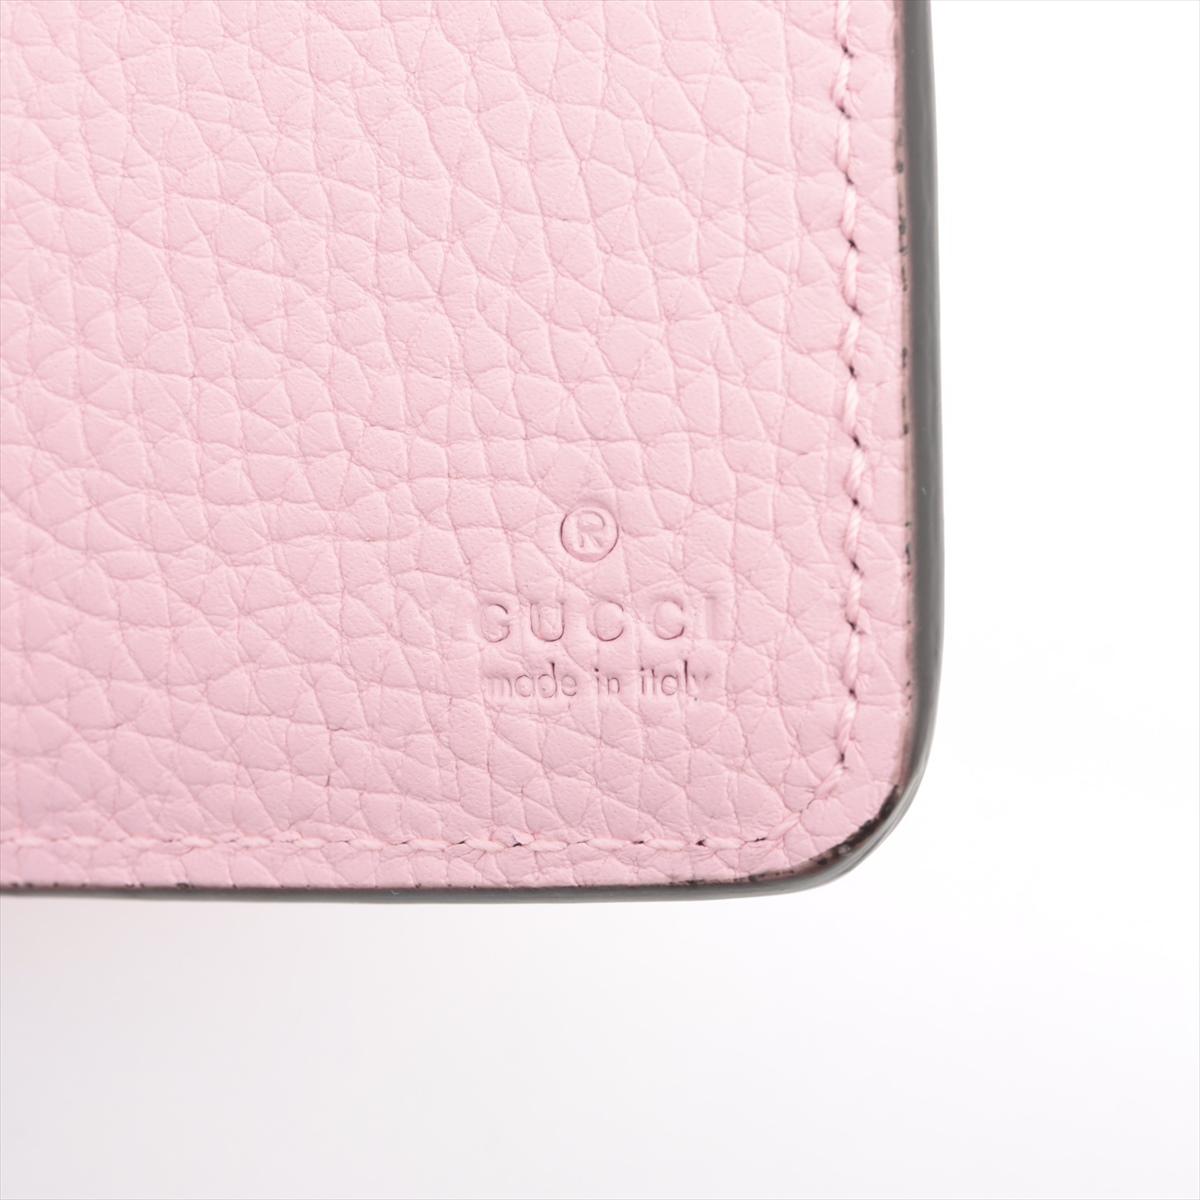 Gucci Bamboo Double G Leather Bi-fold Wallet Pink For Sale 3